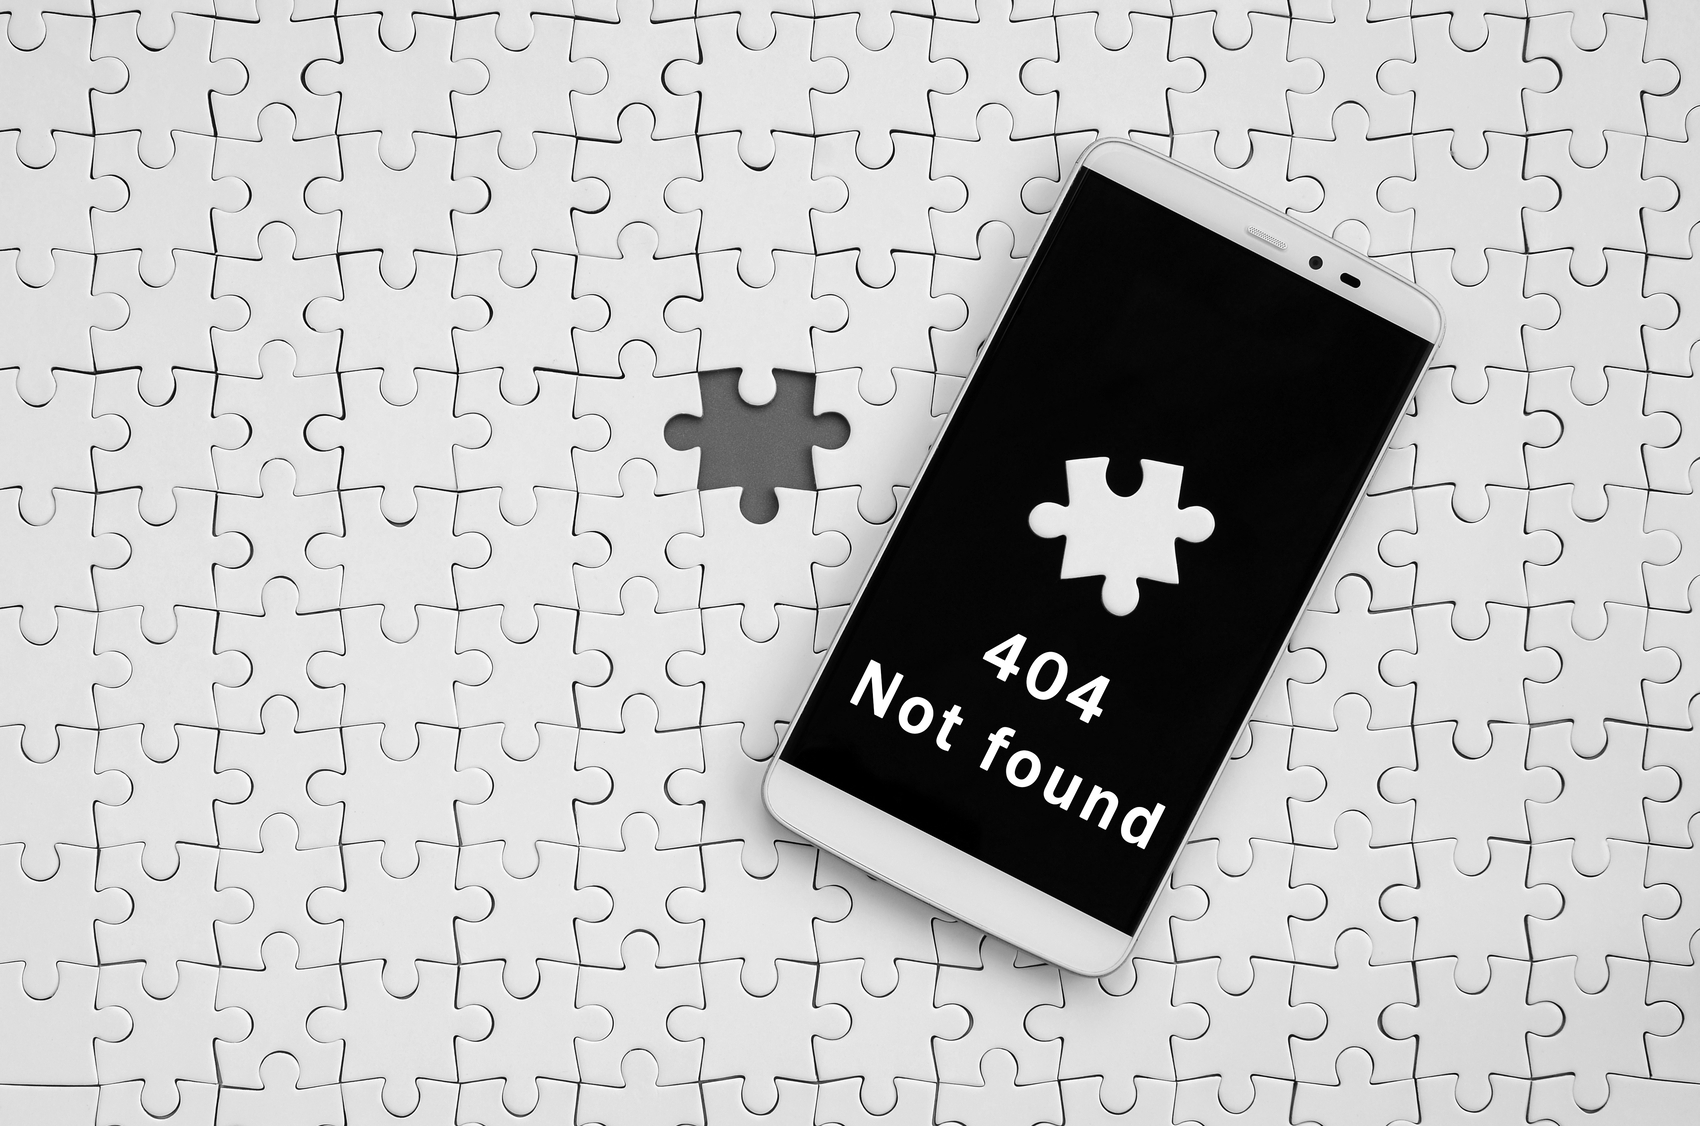 Reasons to fix 404 error for website